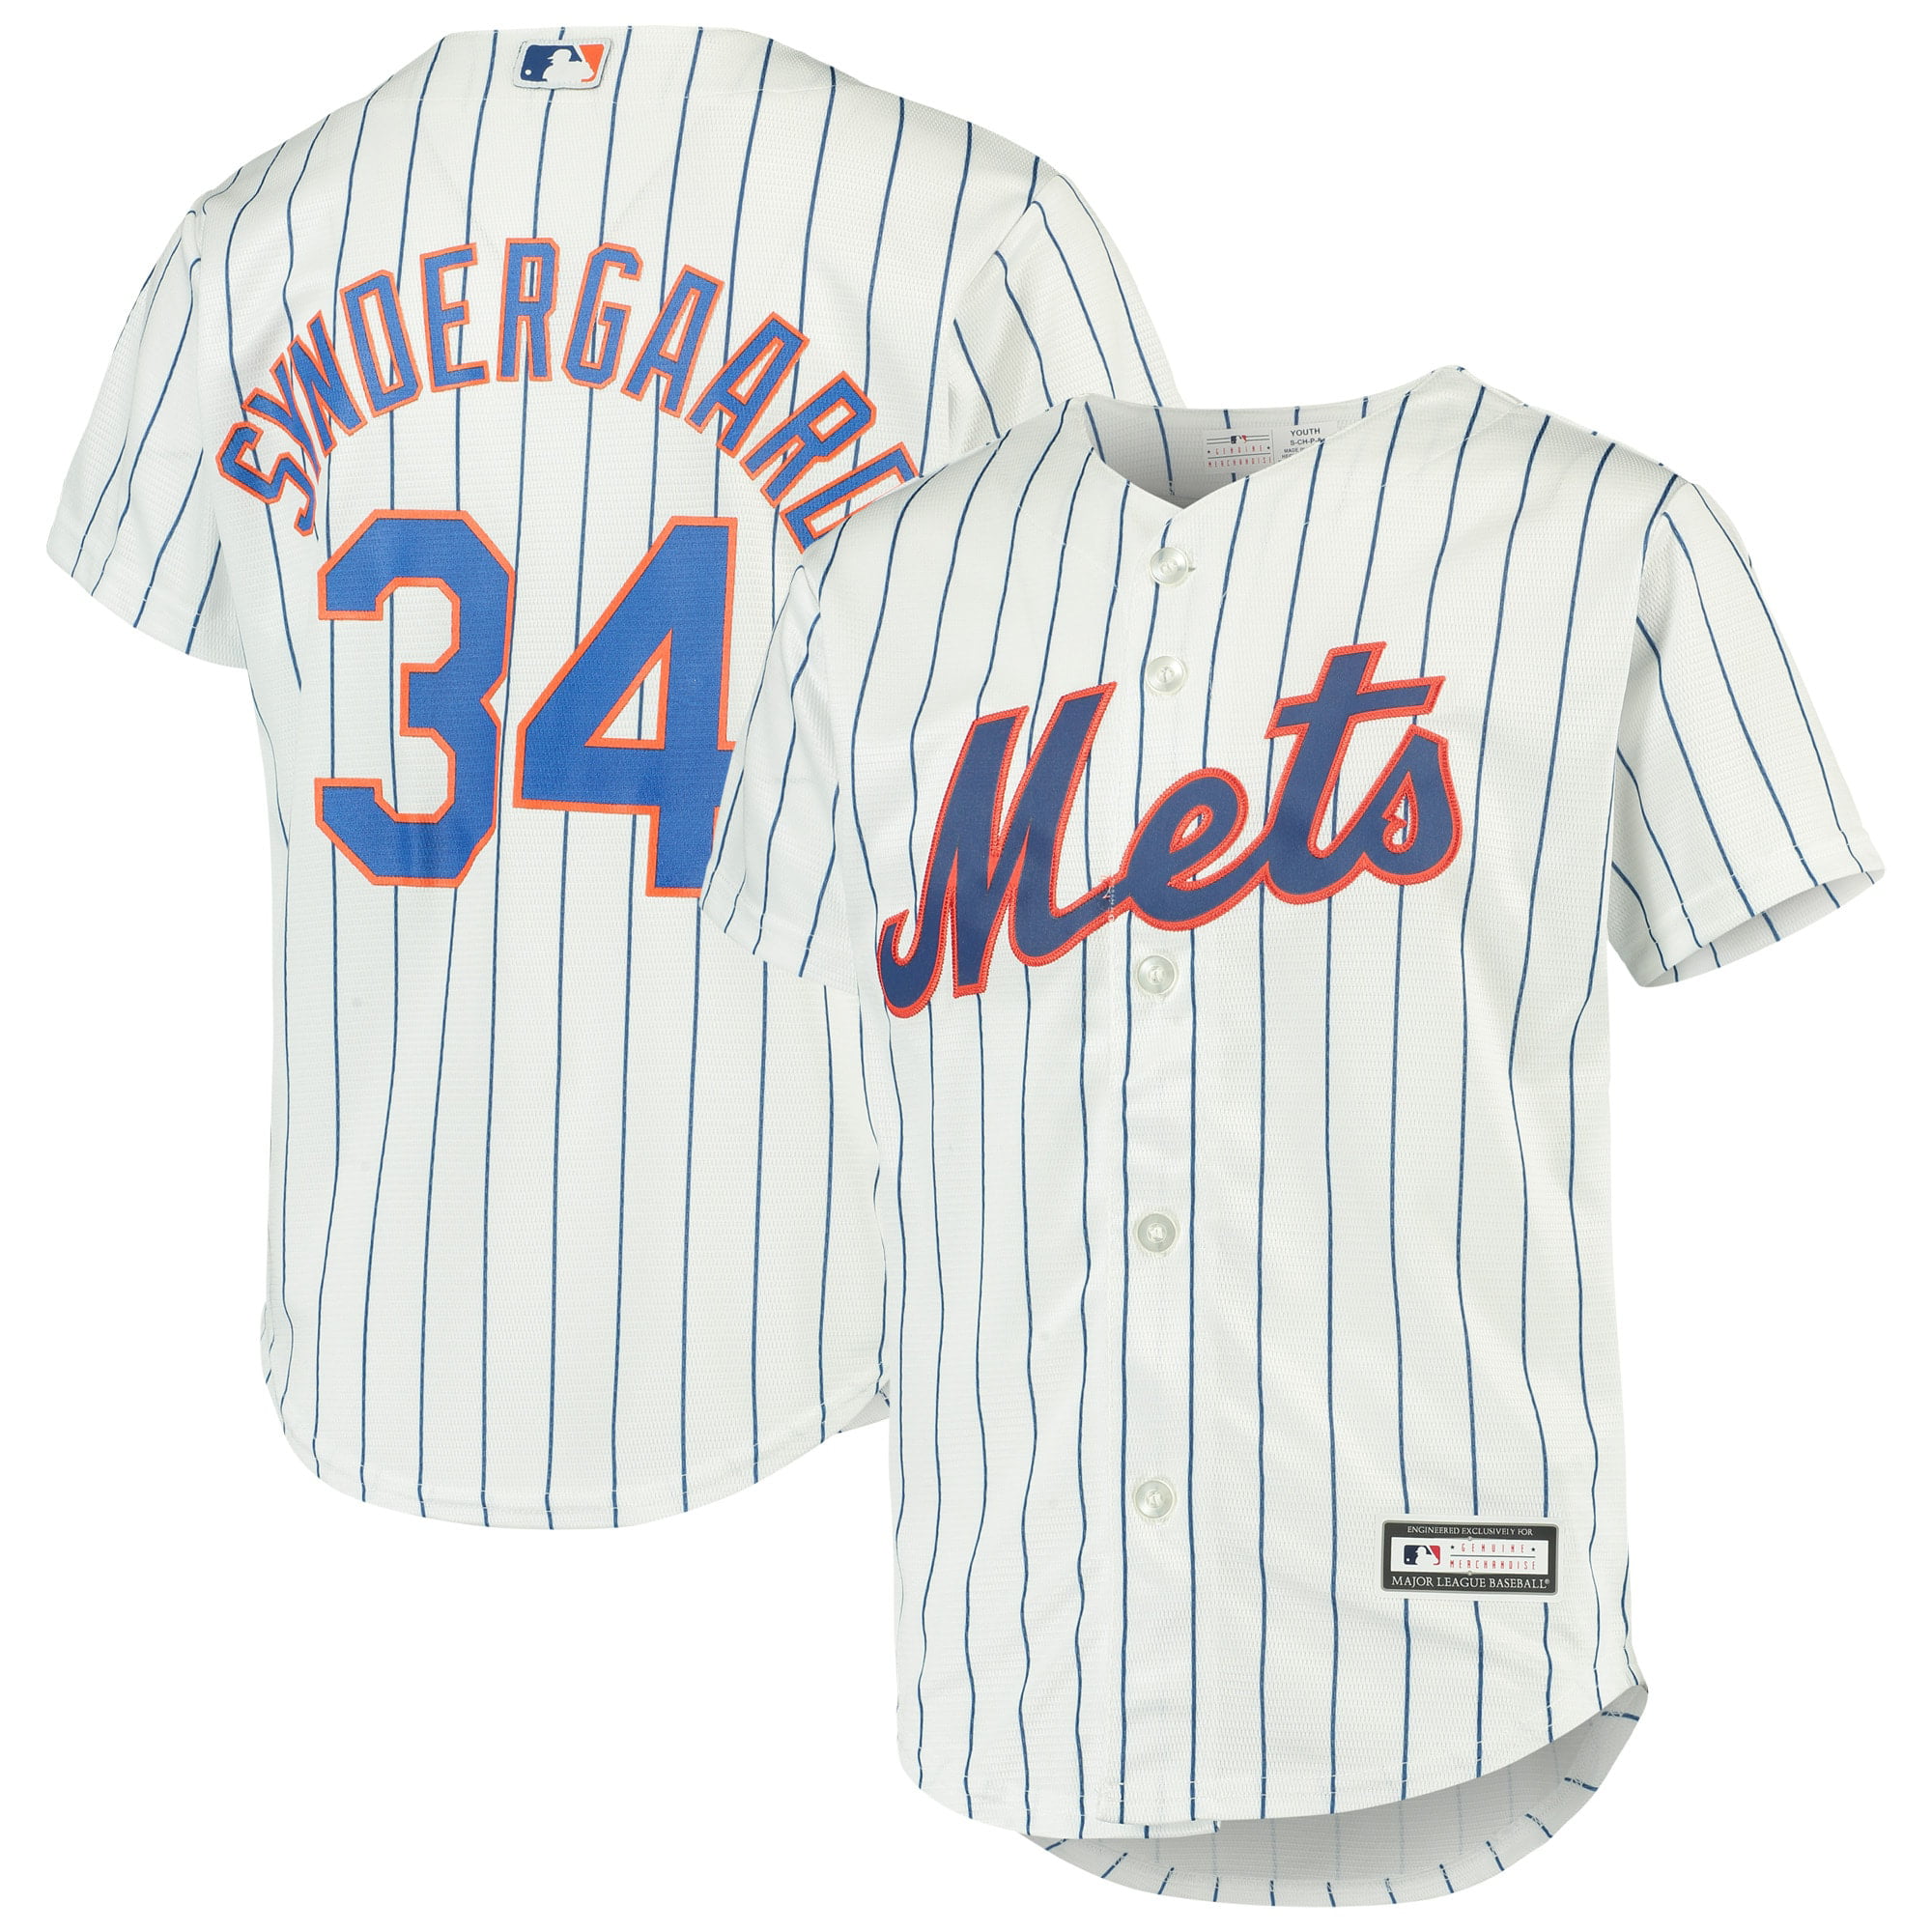 syndergaard jersey youth